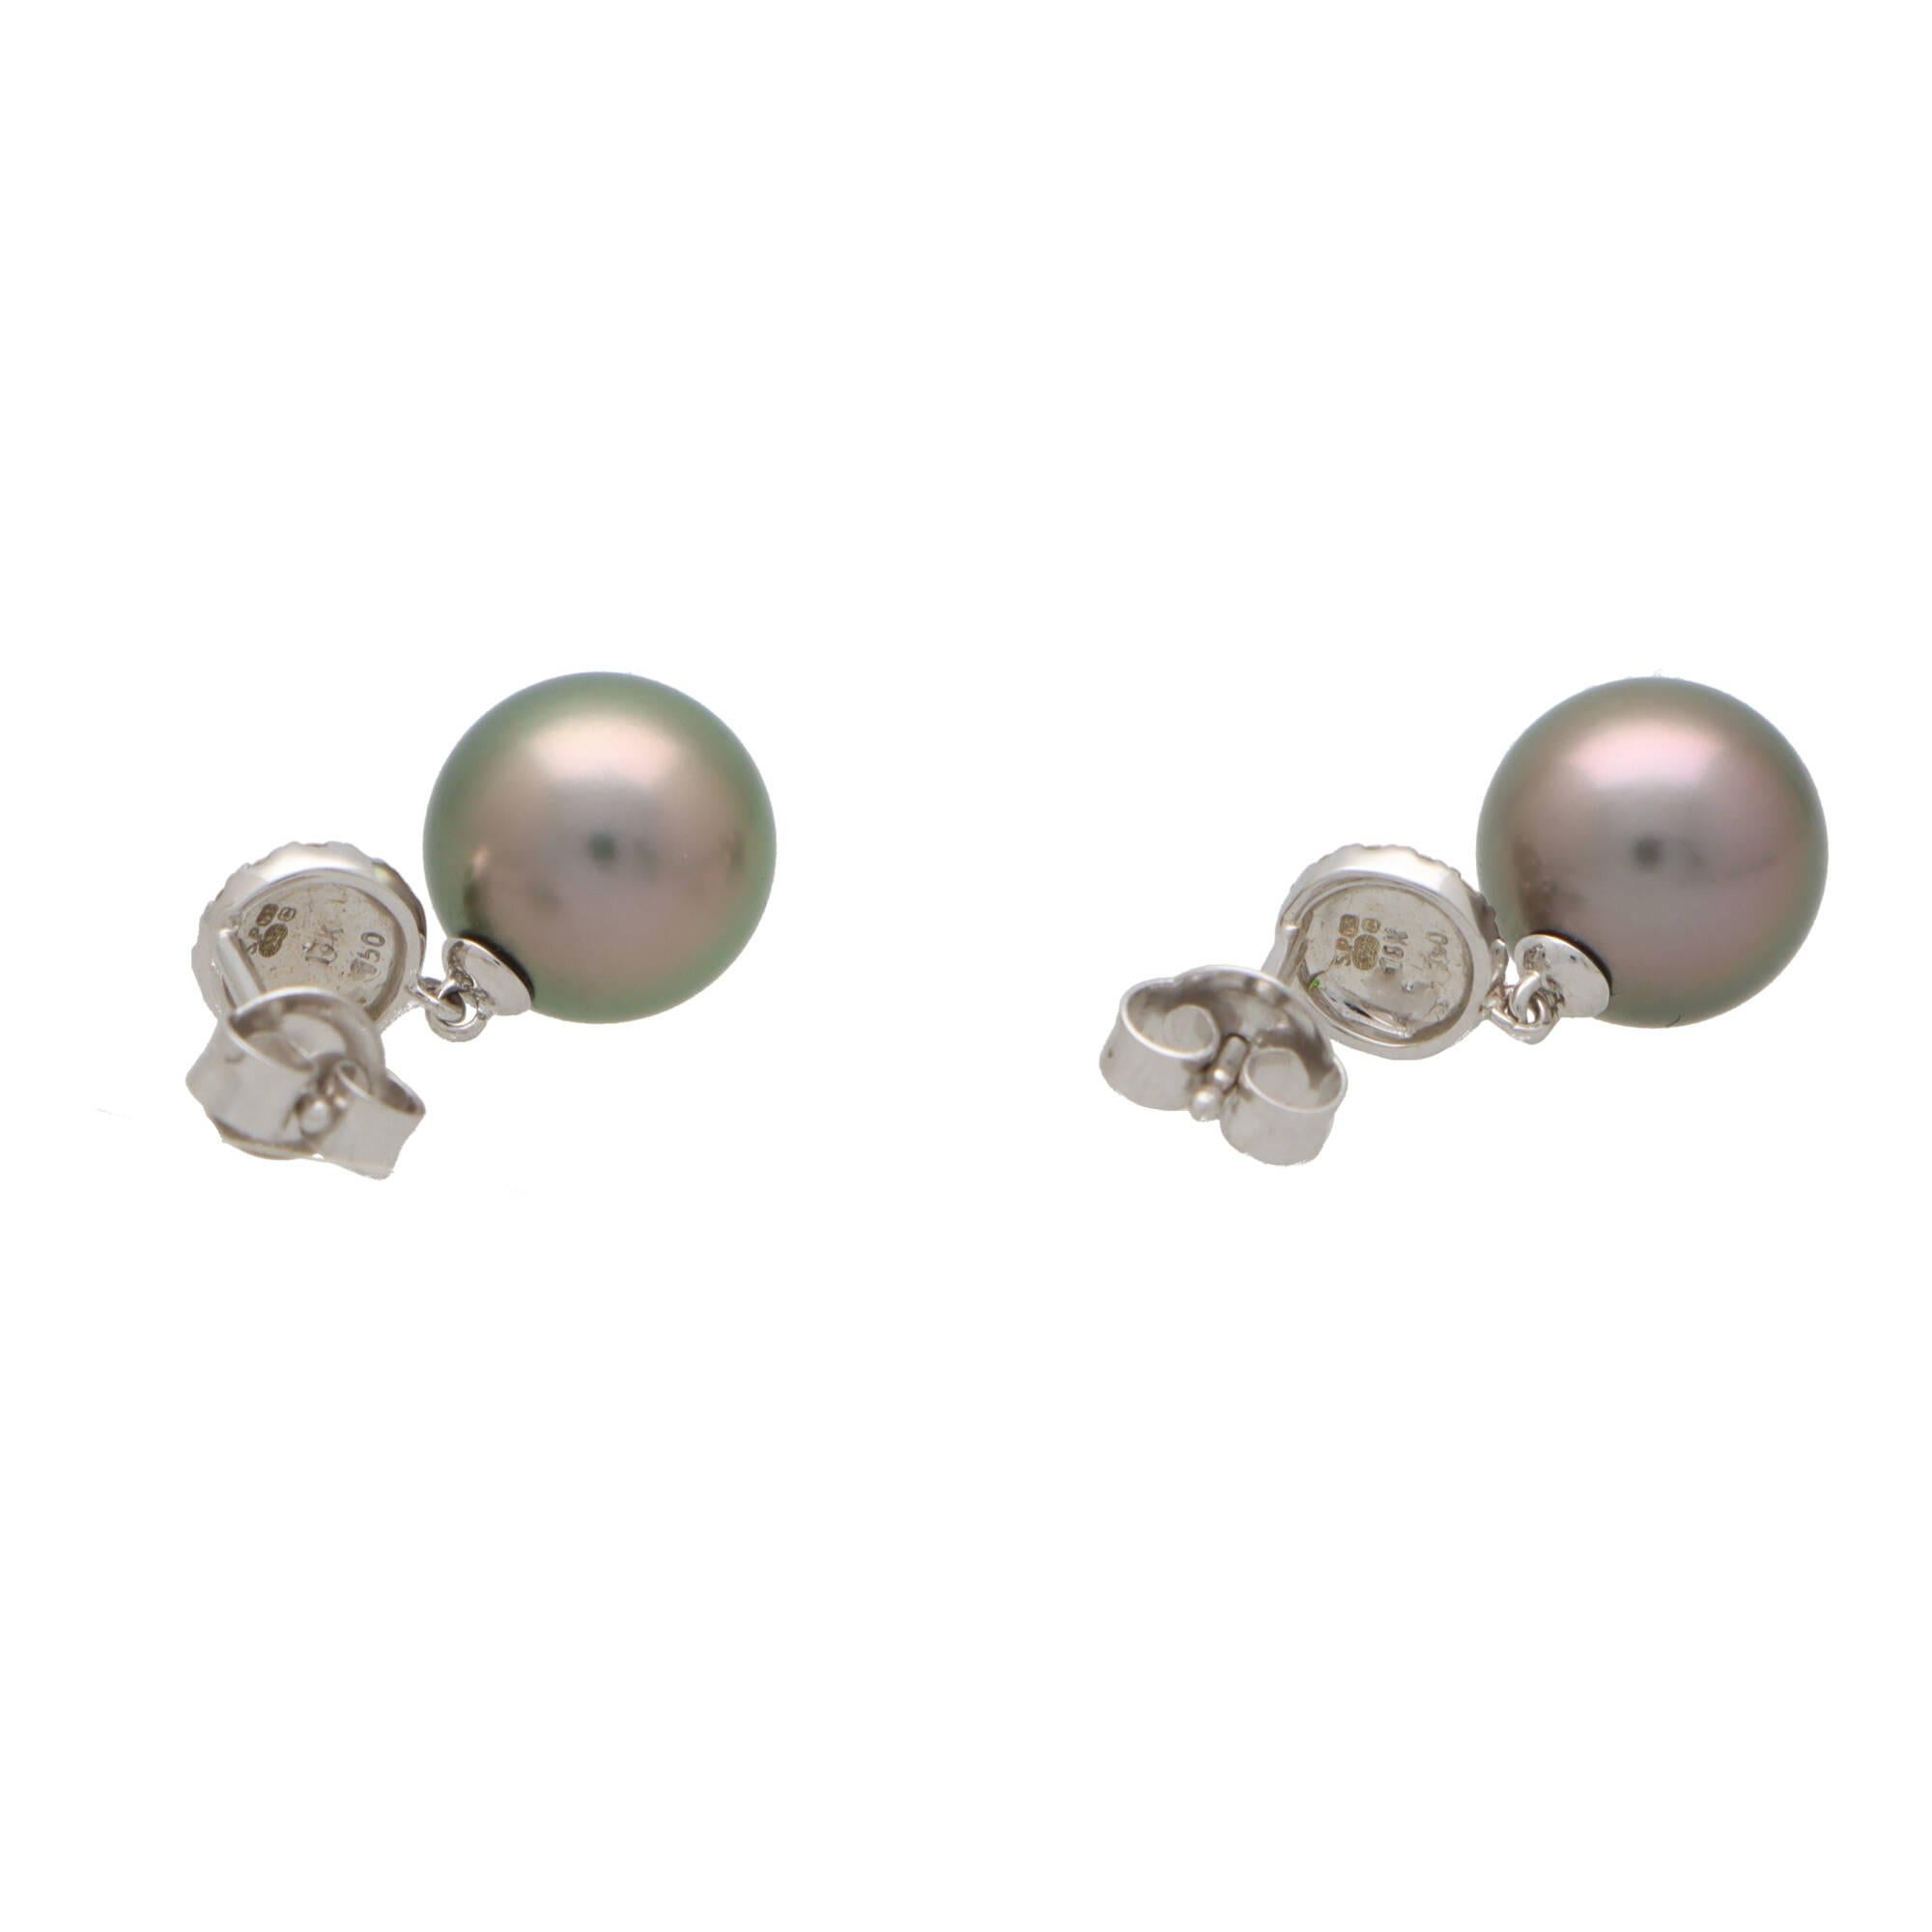  A beautiful pair of Tahitian pearl and diamond drop earrings set in 18k white gold.

Each earring is firstly composed of round white gold disc, entirely pave set with round brilliant cut diamonds. This creates a fantastic sparkle on the lobe! From